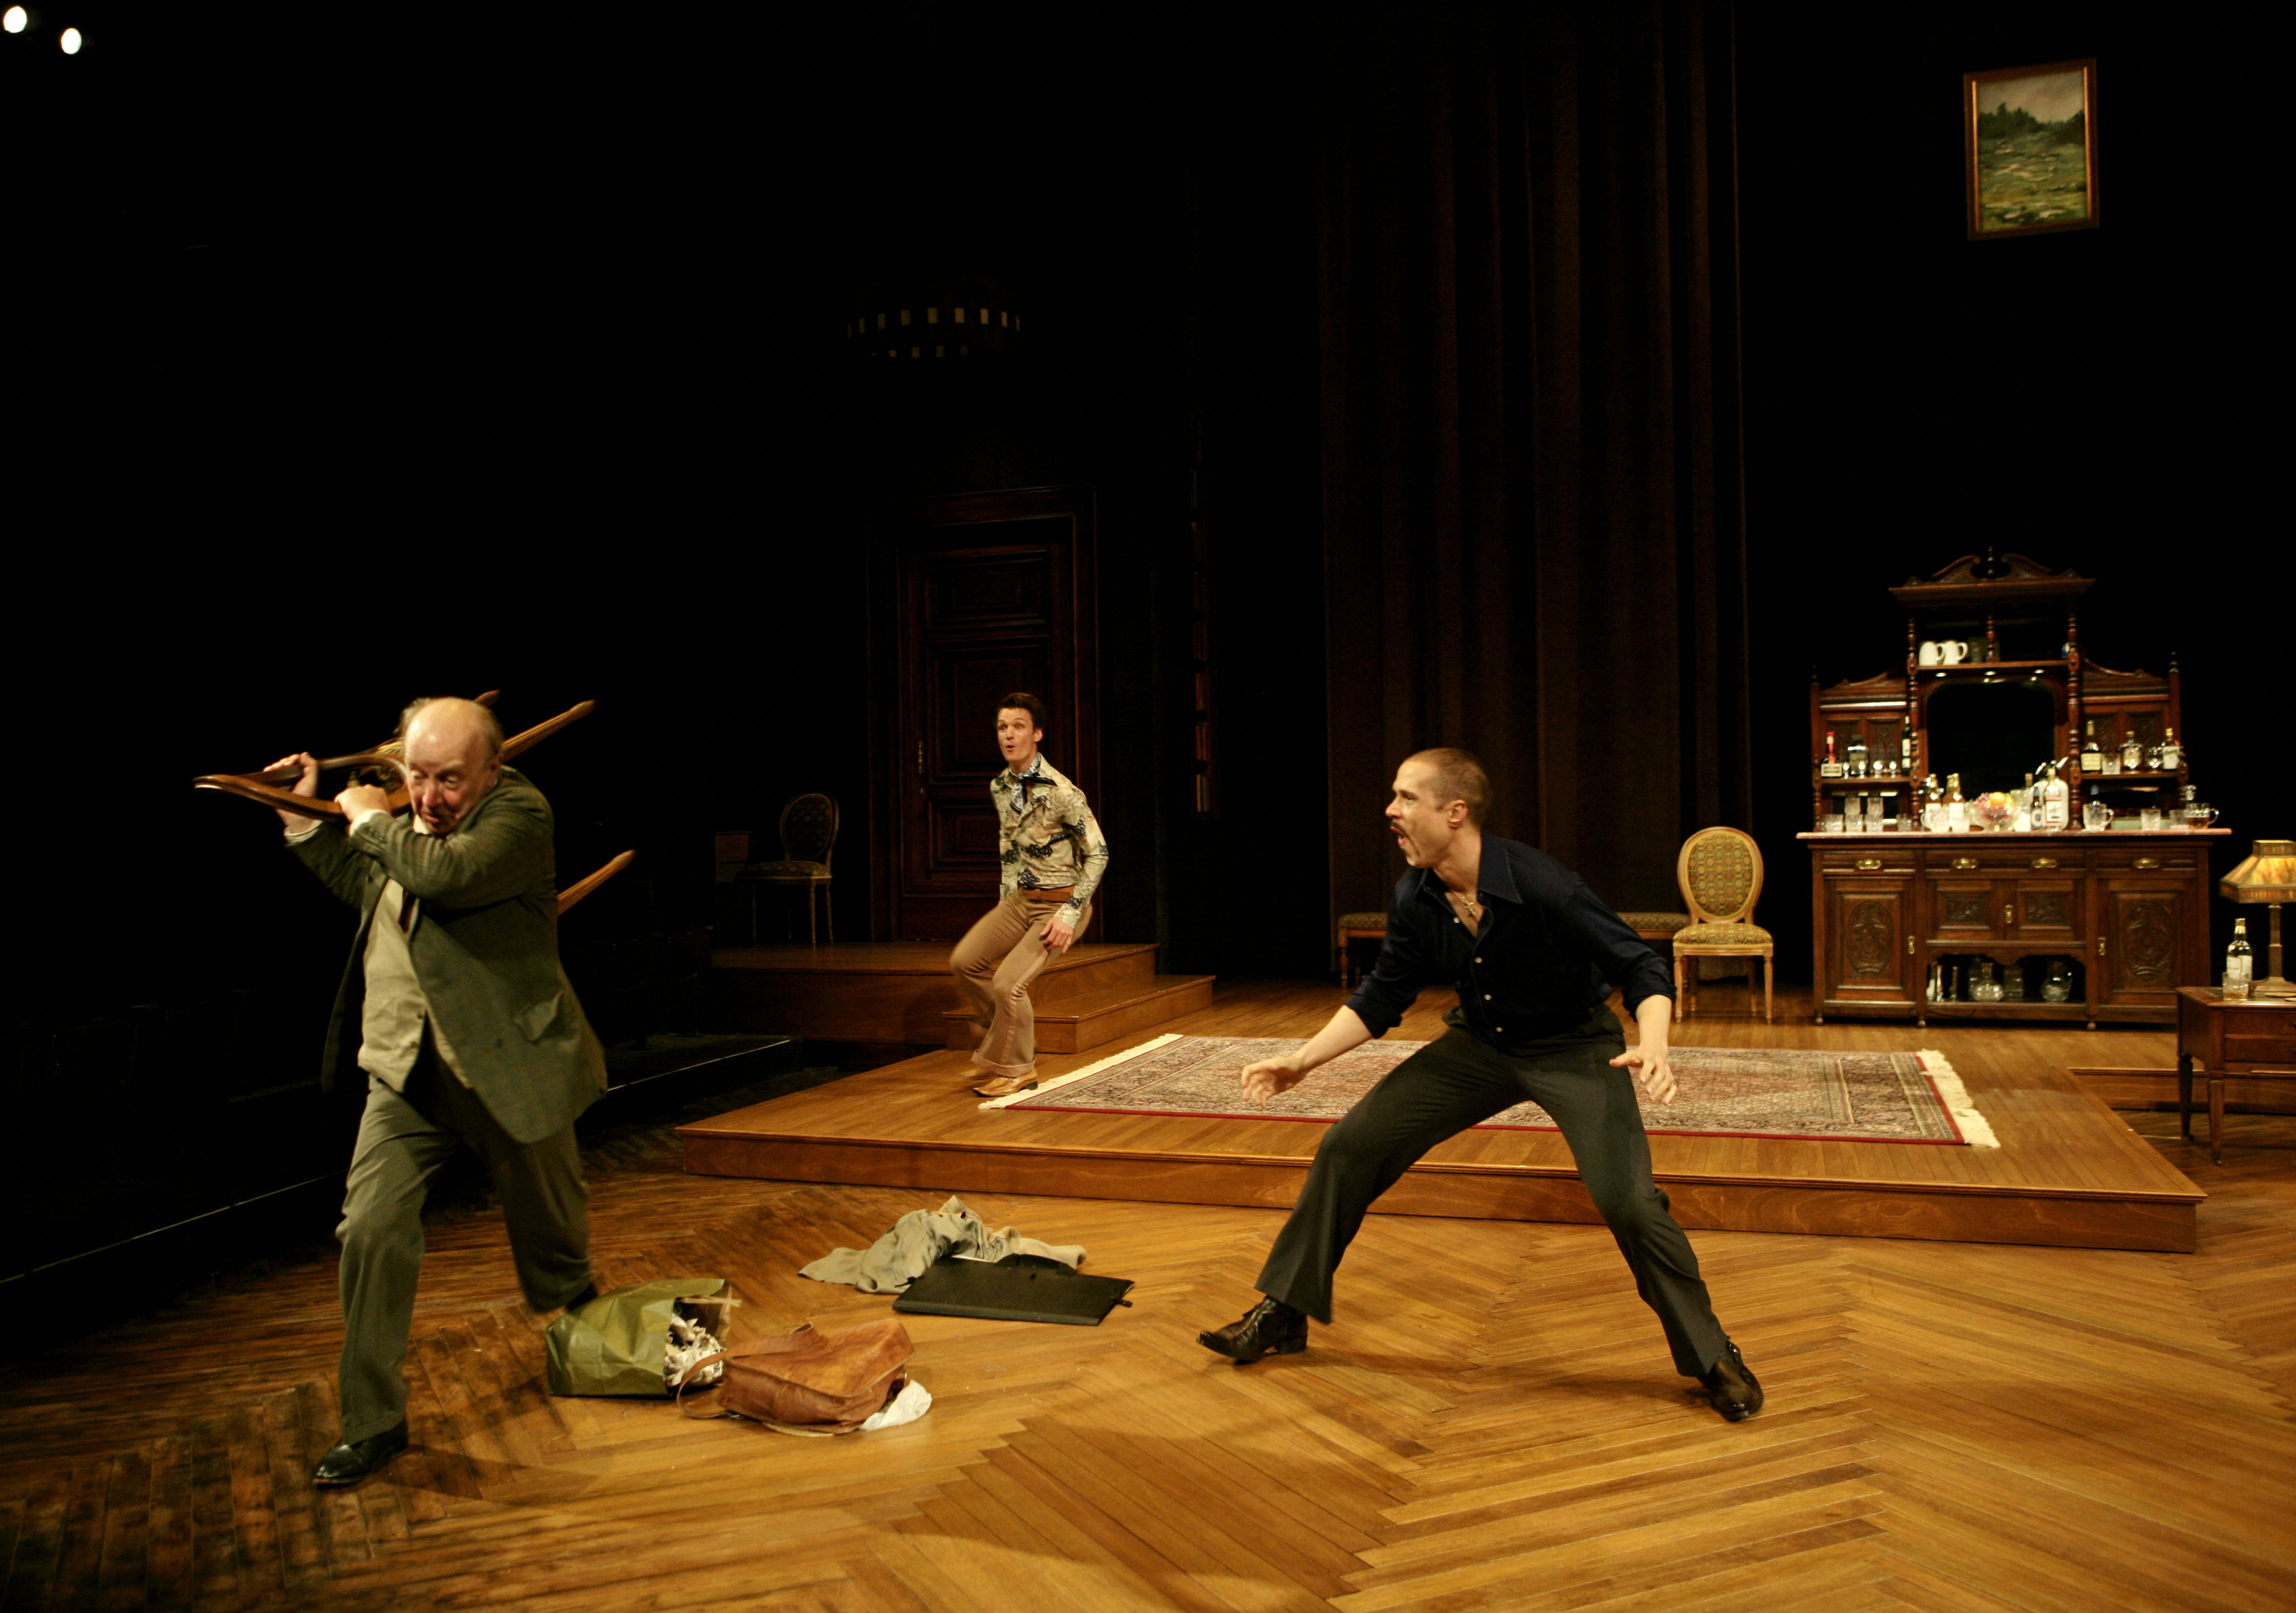 Max Wright as Spooner, Henry David Clarke as Foster, and Lewis D. Wheeler as Briggs in Harold Pinter's NO MAN'S LAND at the American Repertory Theater.